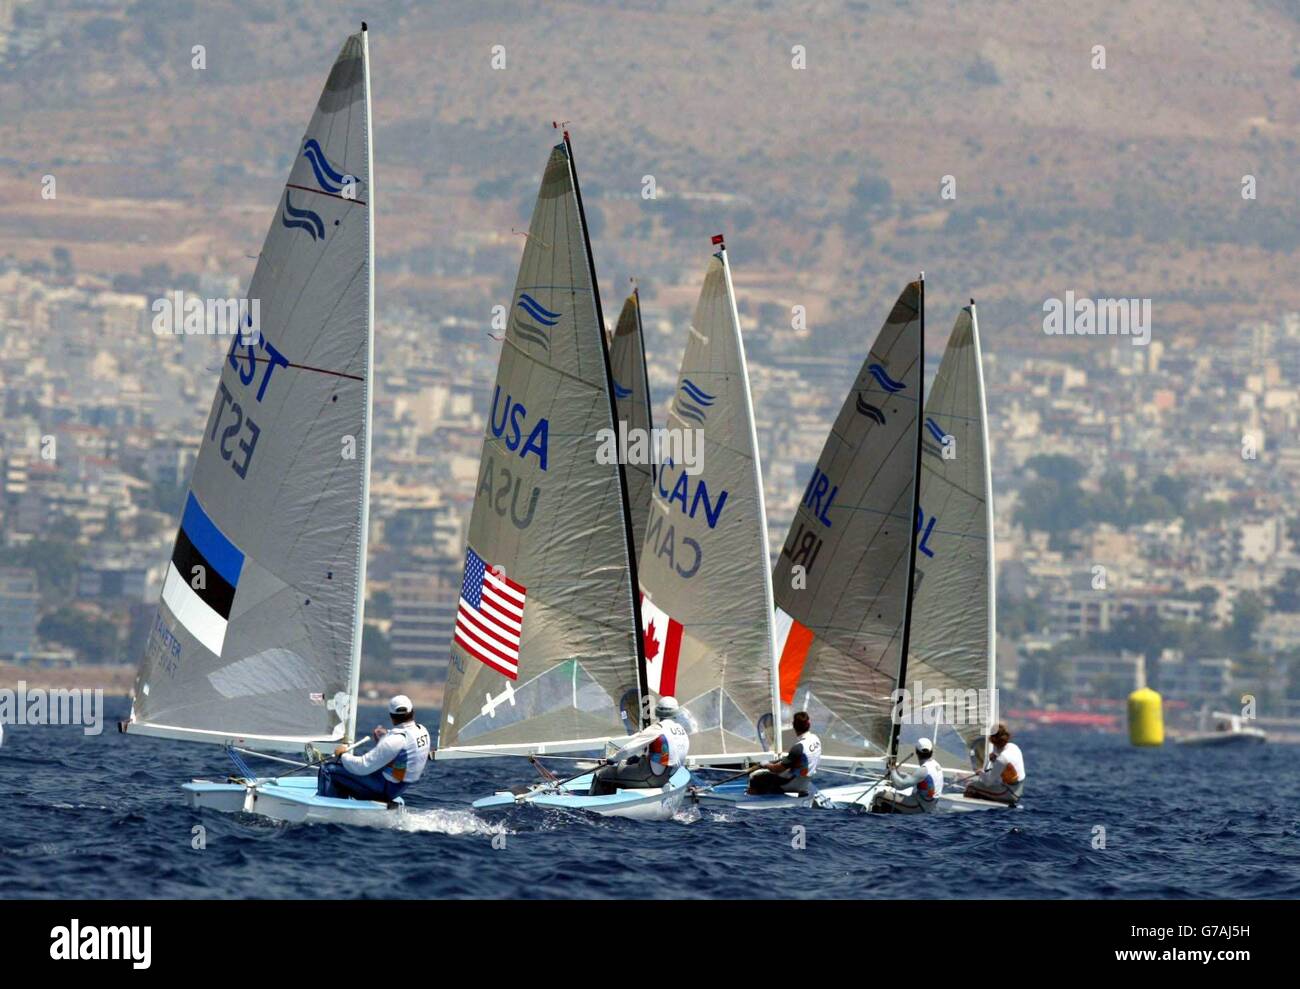 Sailors in the Fin class in competion off the coast of Athens during the Olympics. Stock Photo